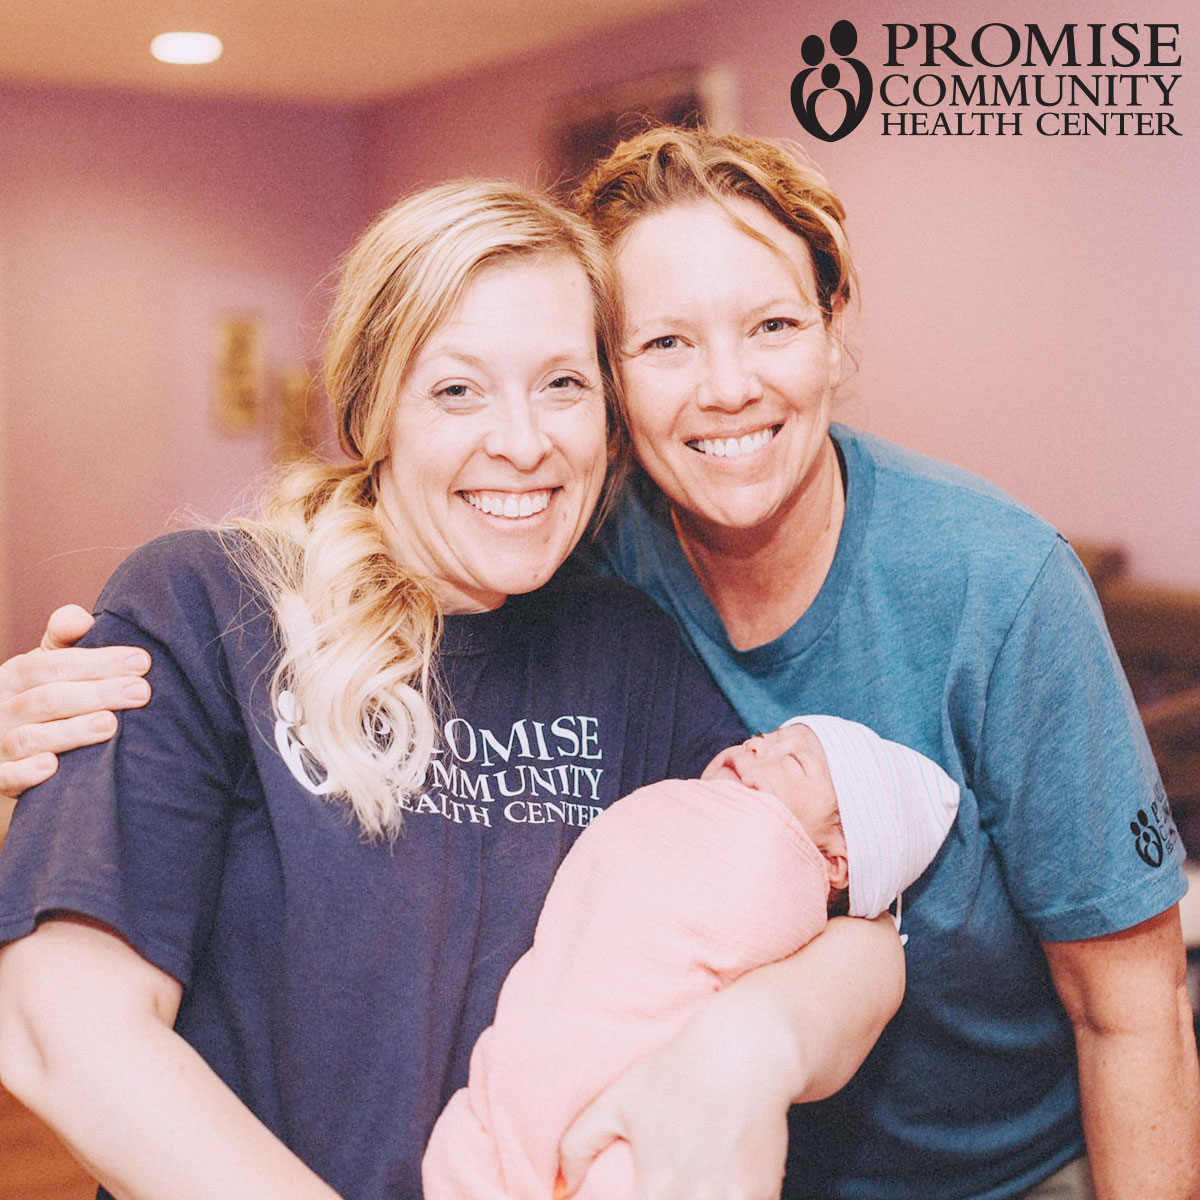 Homebirth in Inwood, Iowa |Promise Community Health Center in Sioux Center, Iowa | Home births in northwest Iowa, Home births in southeast South Dakota, Home births in southwest Minnesota | Home births in Sioux Falls South Dakota, Home births in Beresford South Dakota, Home births in Sioux City IA, Home births in LeMars IA, Home births in Worthington MN, Home births in Iowa, Home births in South Dakota, Home births in Minnesota